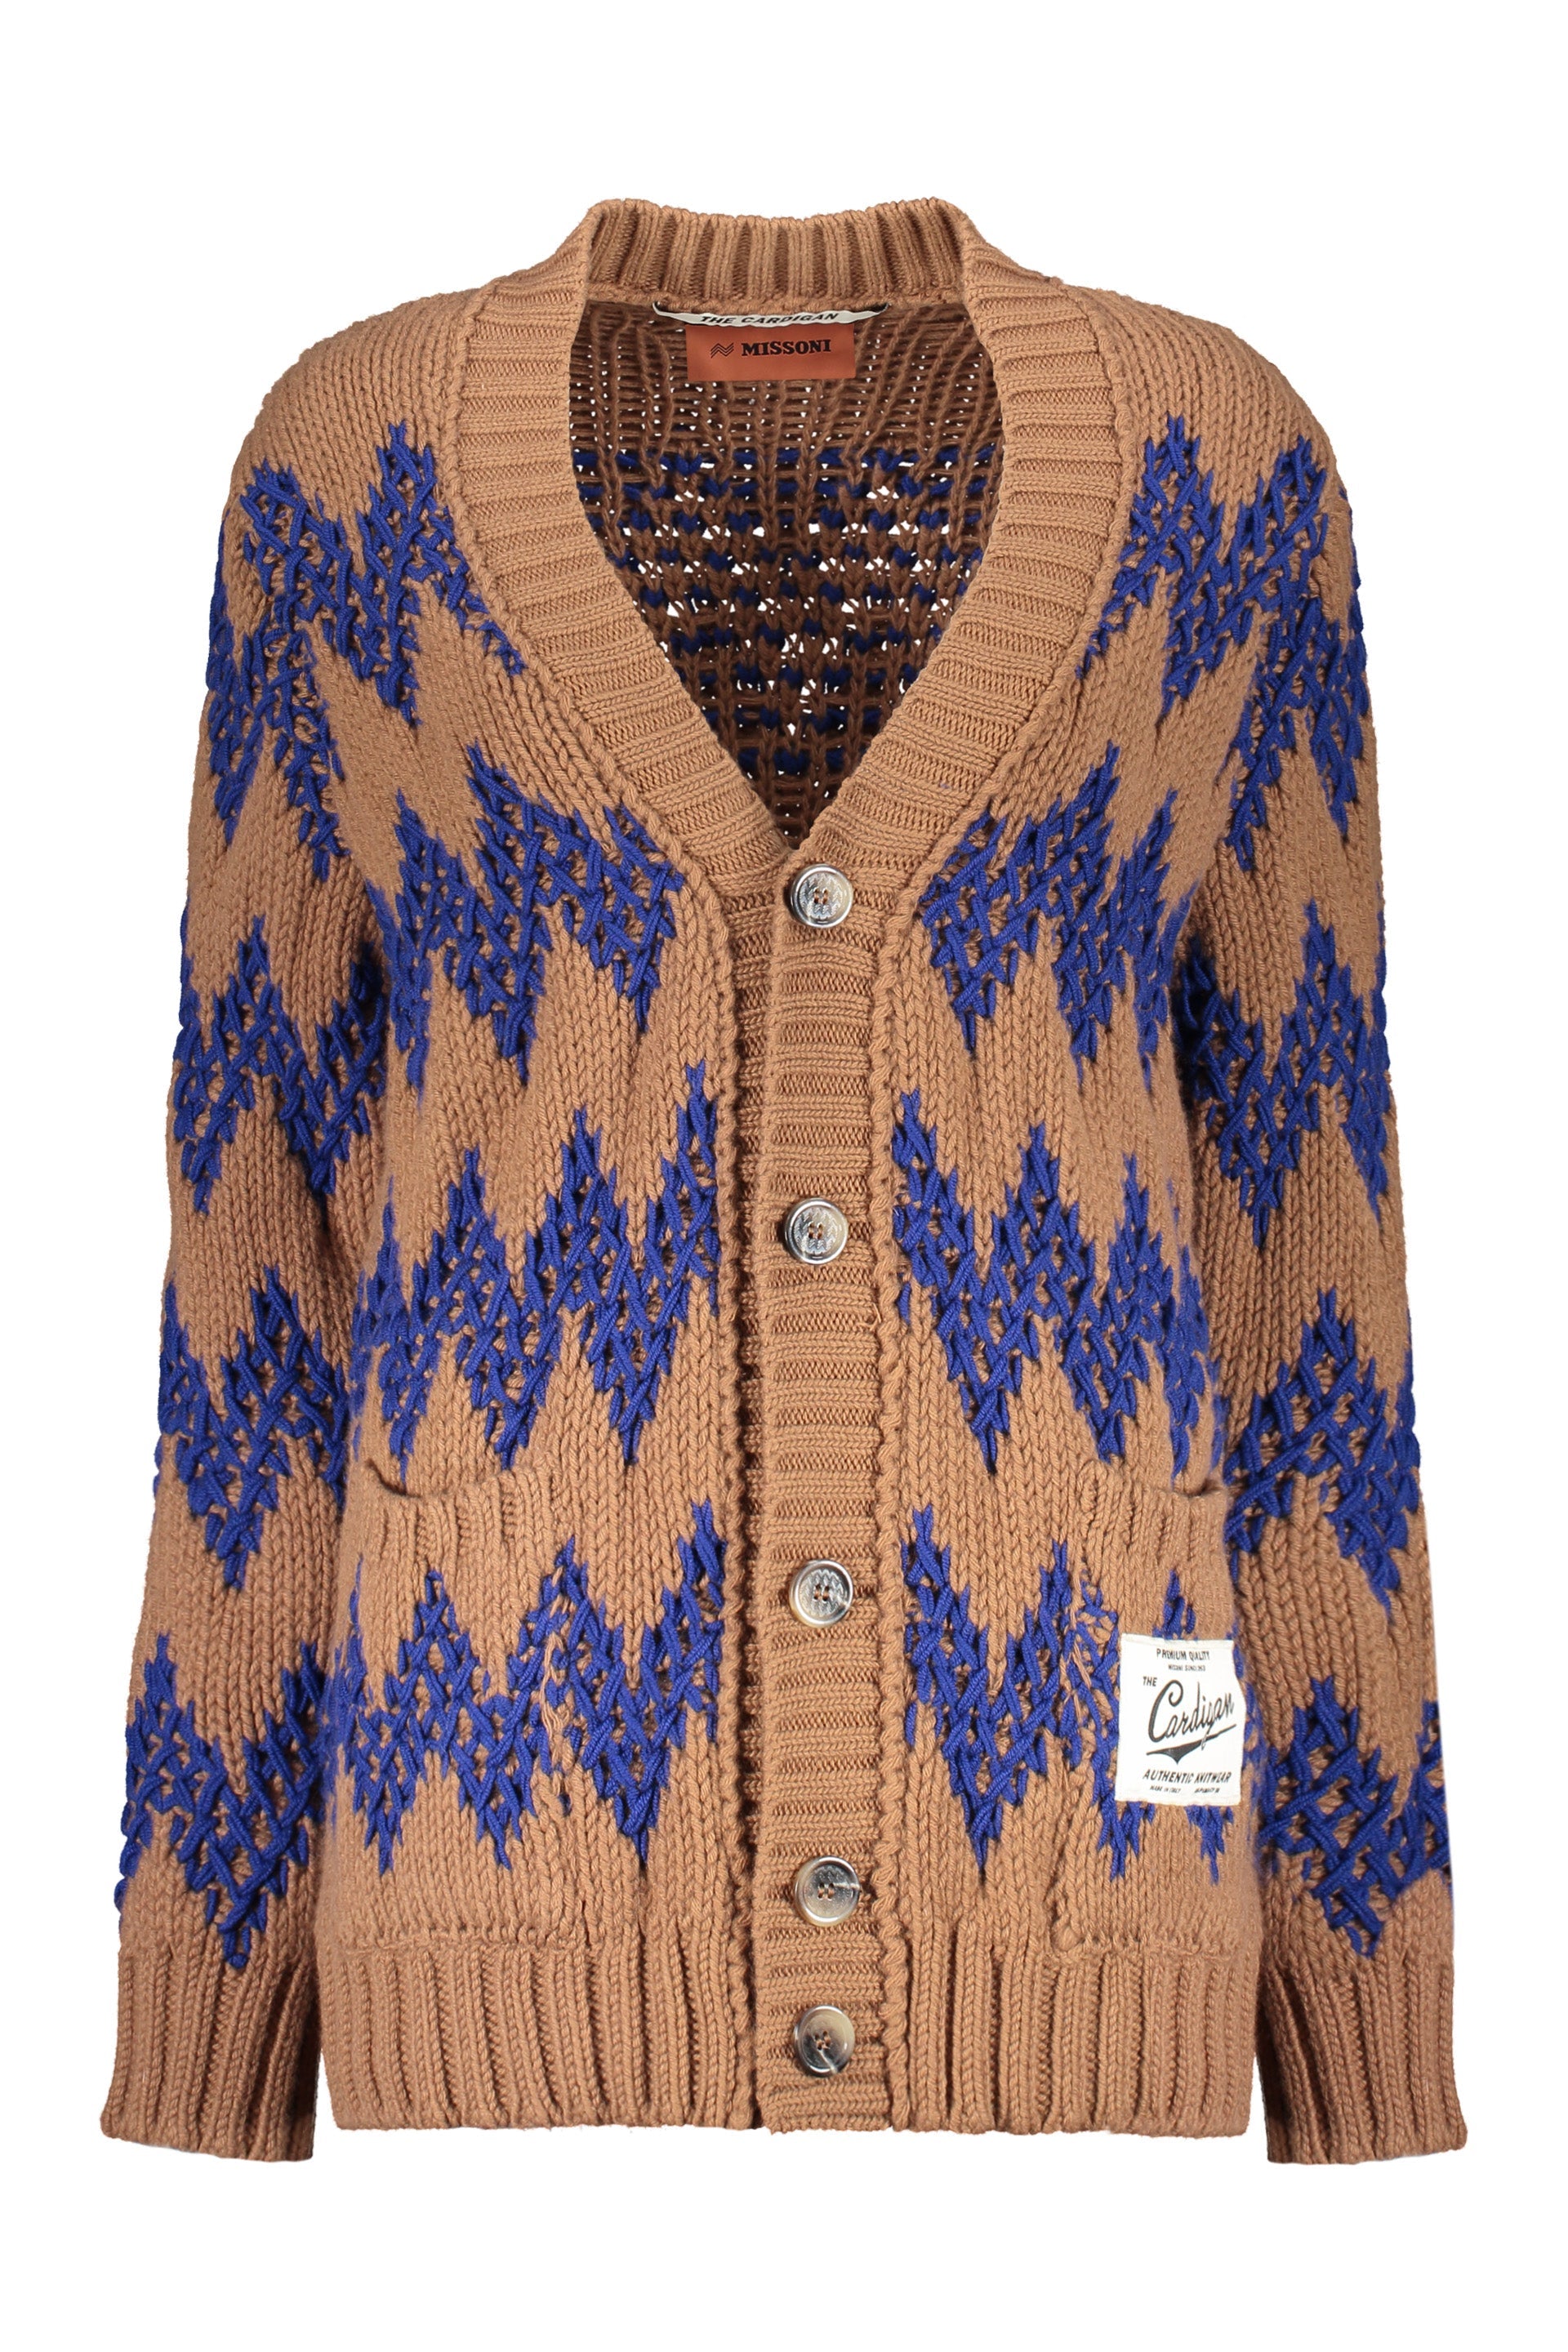 Missoni-OUTLET-SALE-Wool-cardigan-Strick-XS-ARCHIVE-COLLECTION.jpg